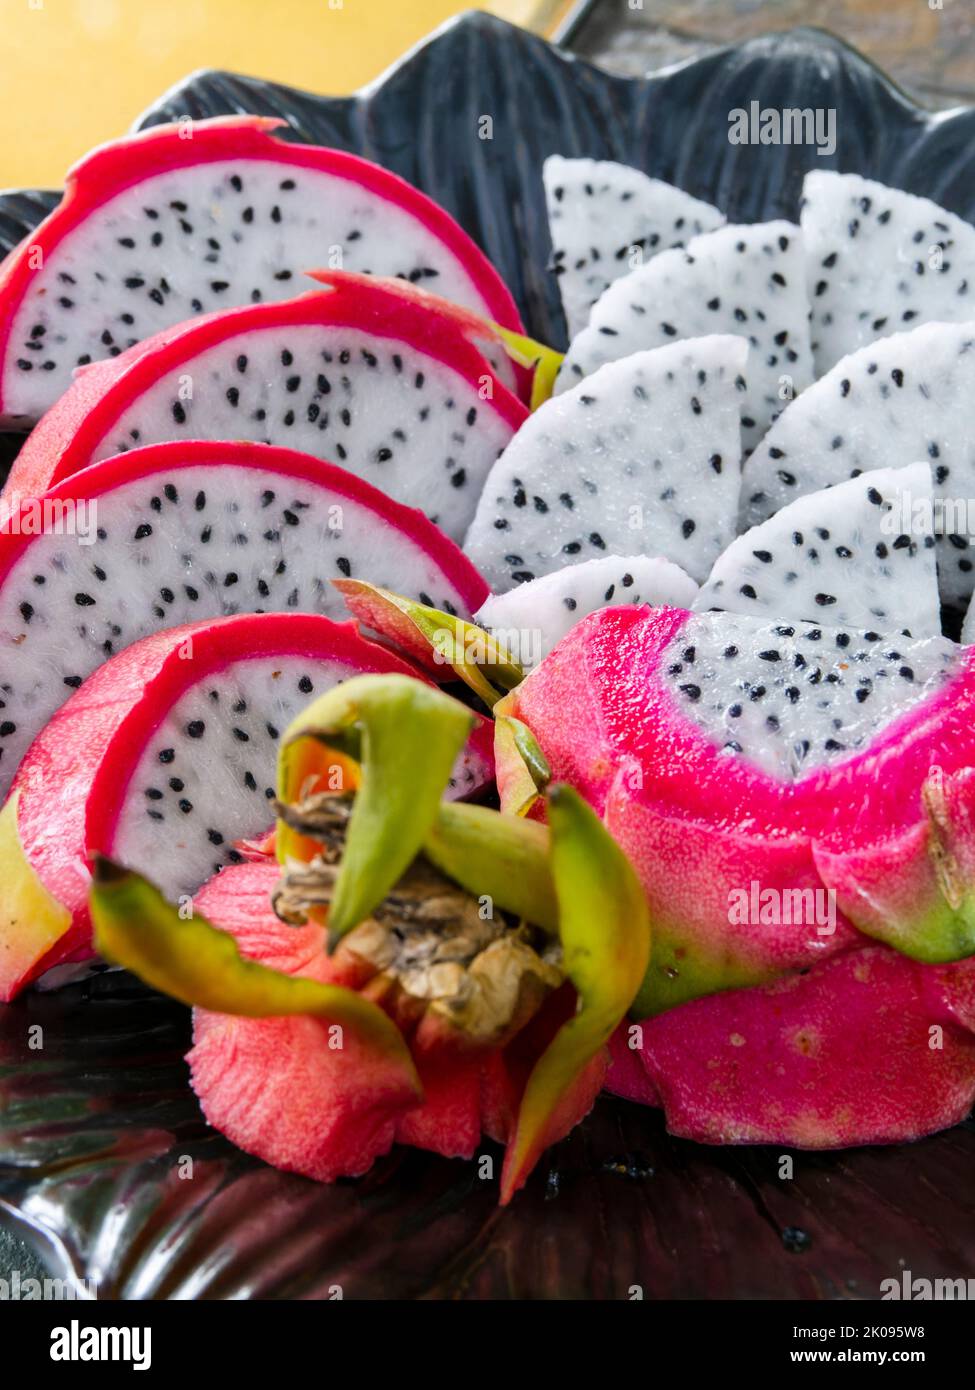 Plate of sliced dragon fruit, pitahaya or pitaya, from the family Cactaceae, the fruit of several different cactus species. Stock Photo